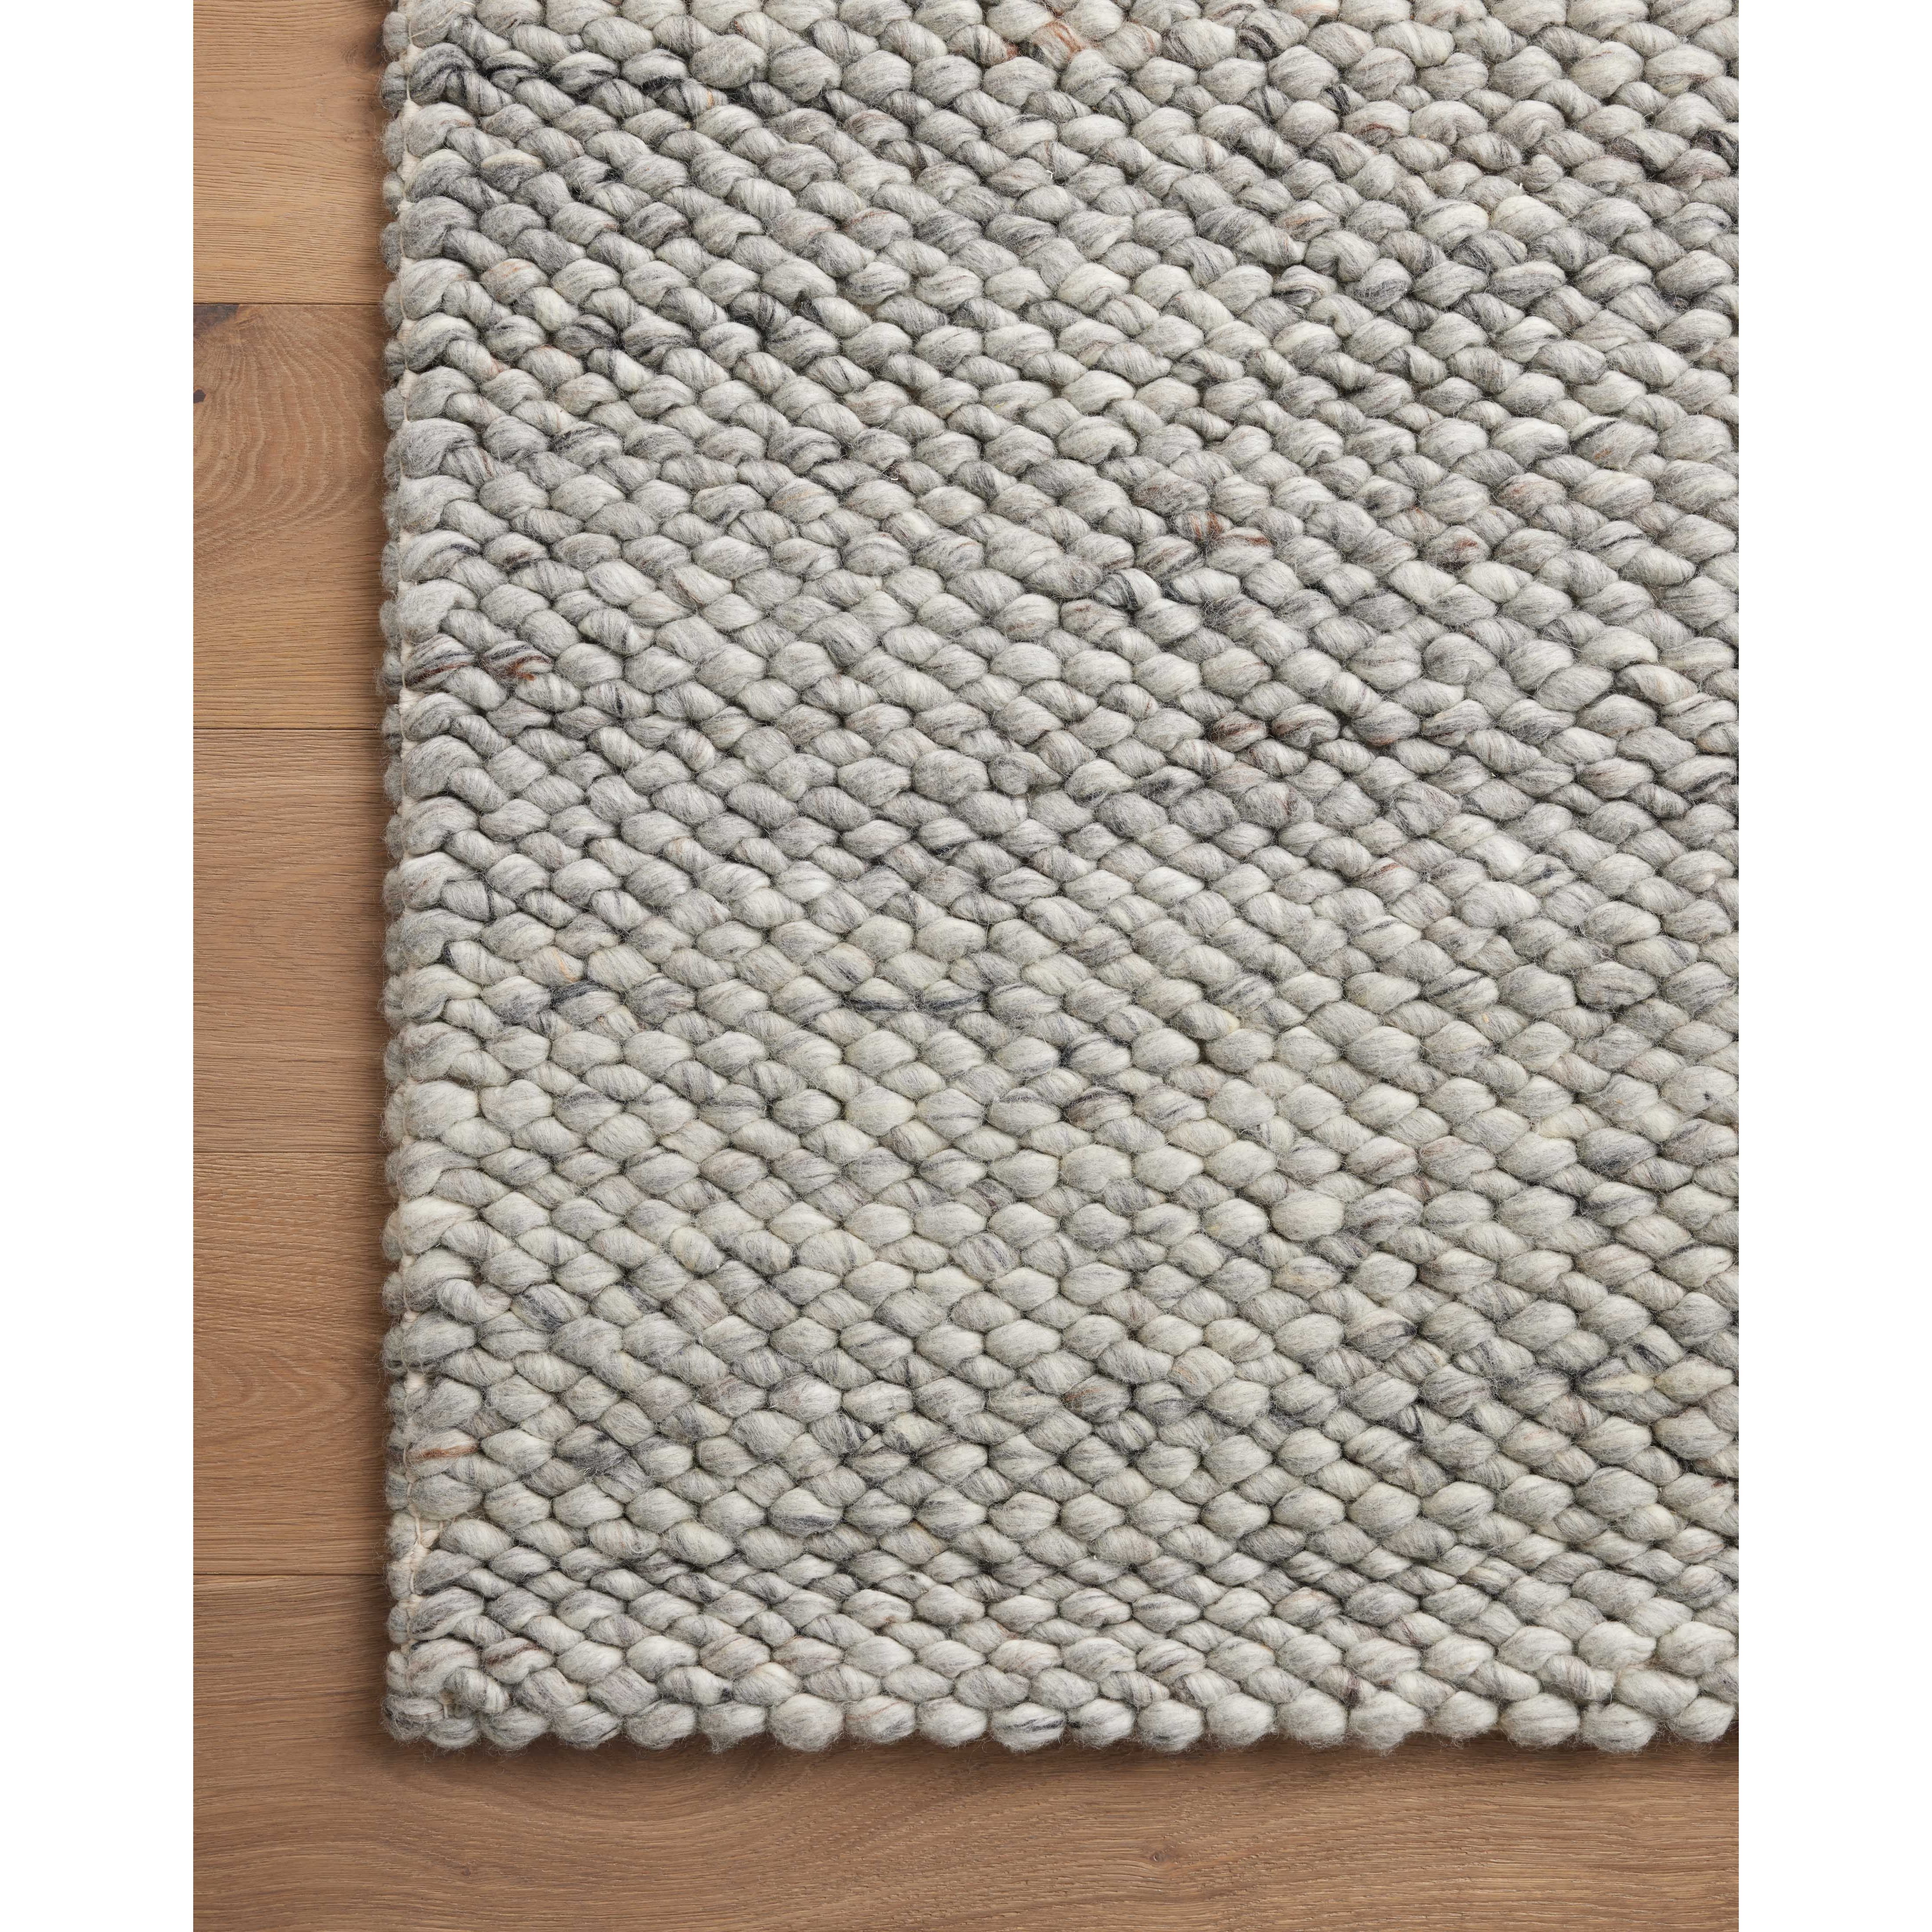 The Hendrick Grey Rug is a beautifully textured wool area rug with an elevated ease reminiscent of a cozy handmade sweater. The rug is very plush underfoot, making it equally welcome in bedrooms and living rooms. The hand-woven weave pattern adds dimension while the rug’s color palette is soft, neutral, and serene. Amethyst Home provides interior design, new construction, custom furniture, and area rugs in the Charlotte metro area.